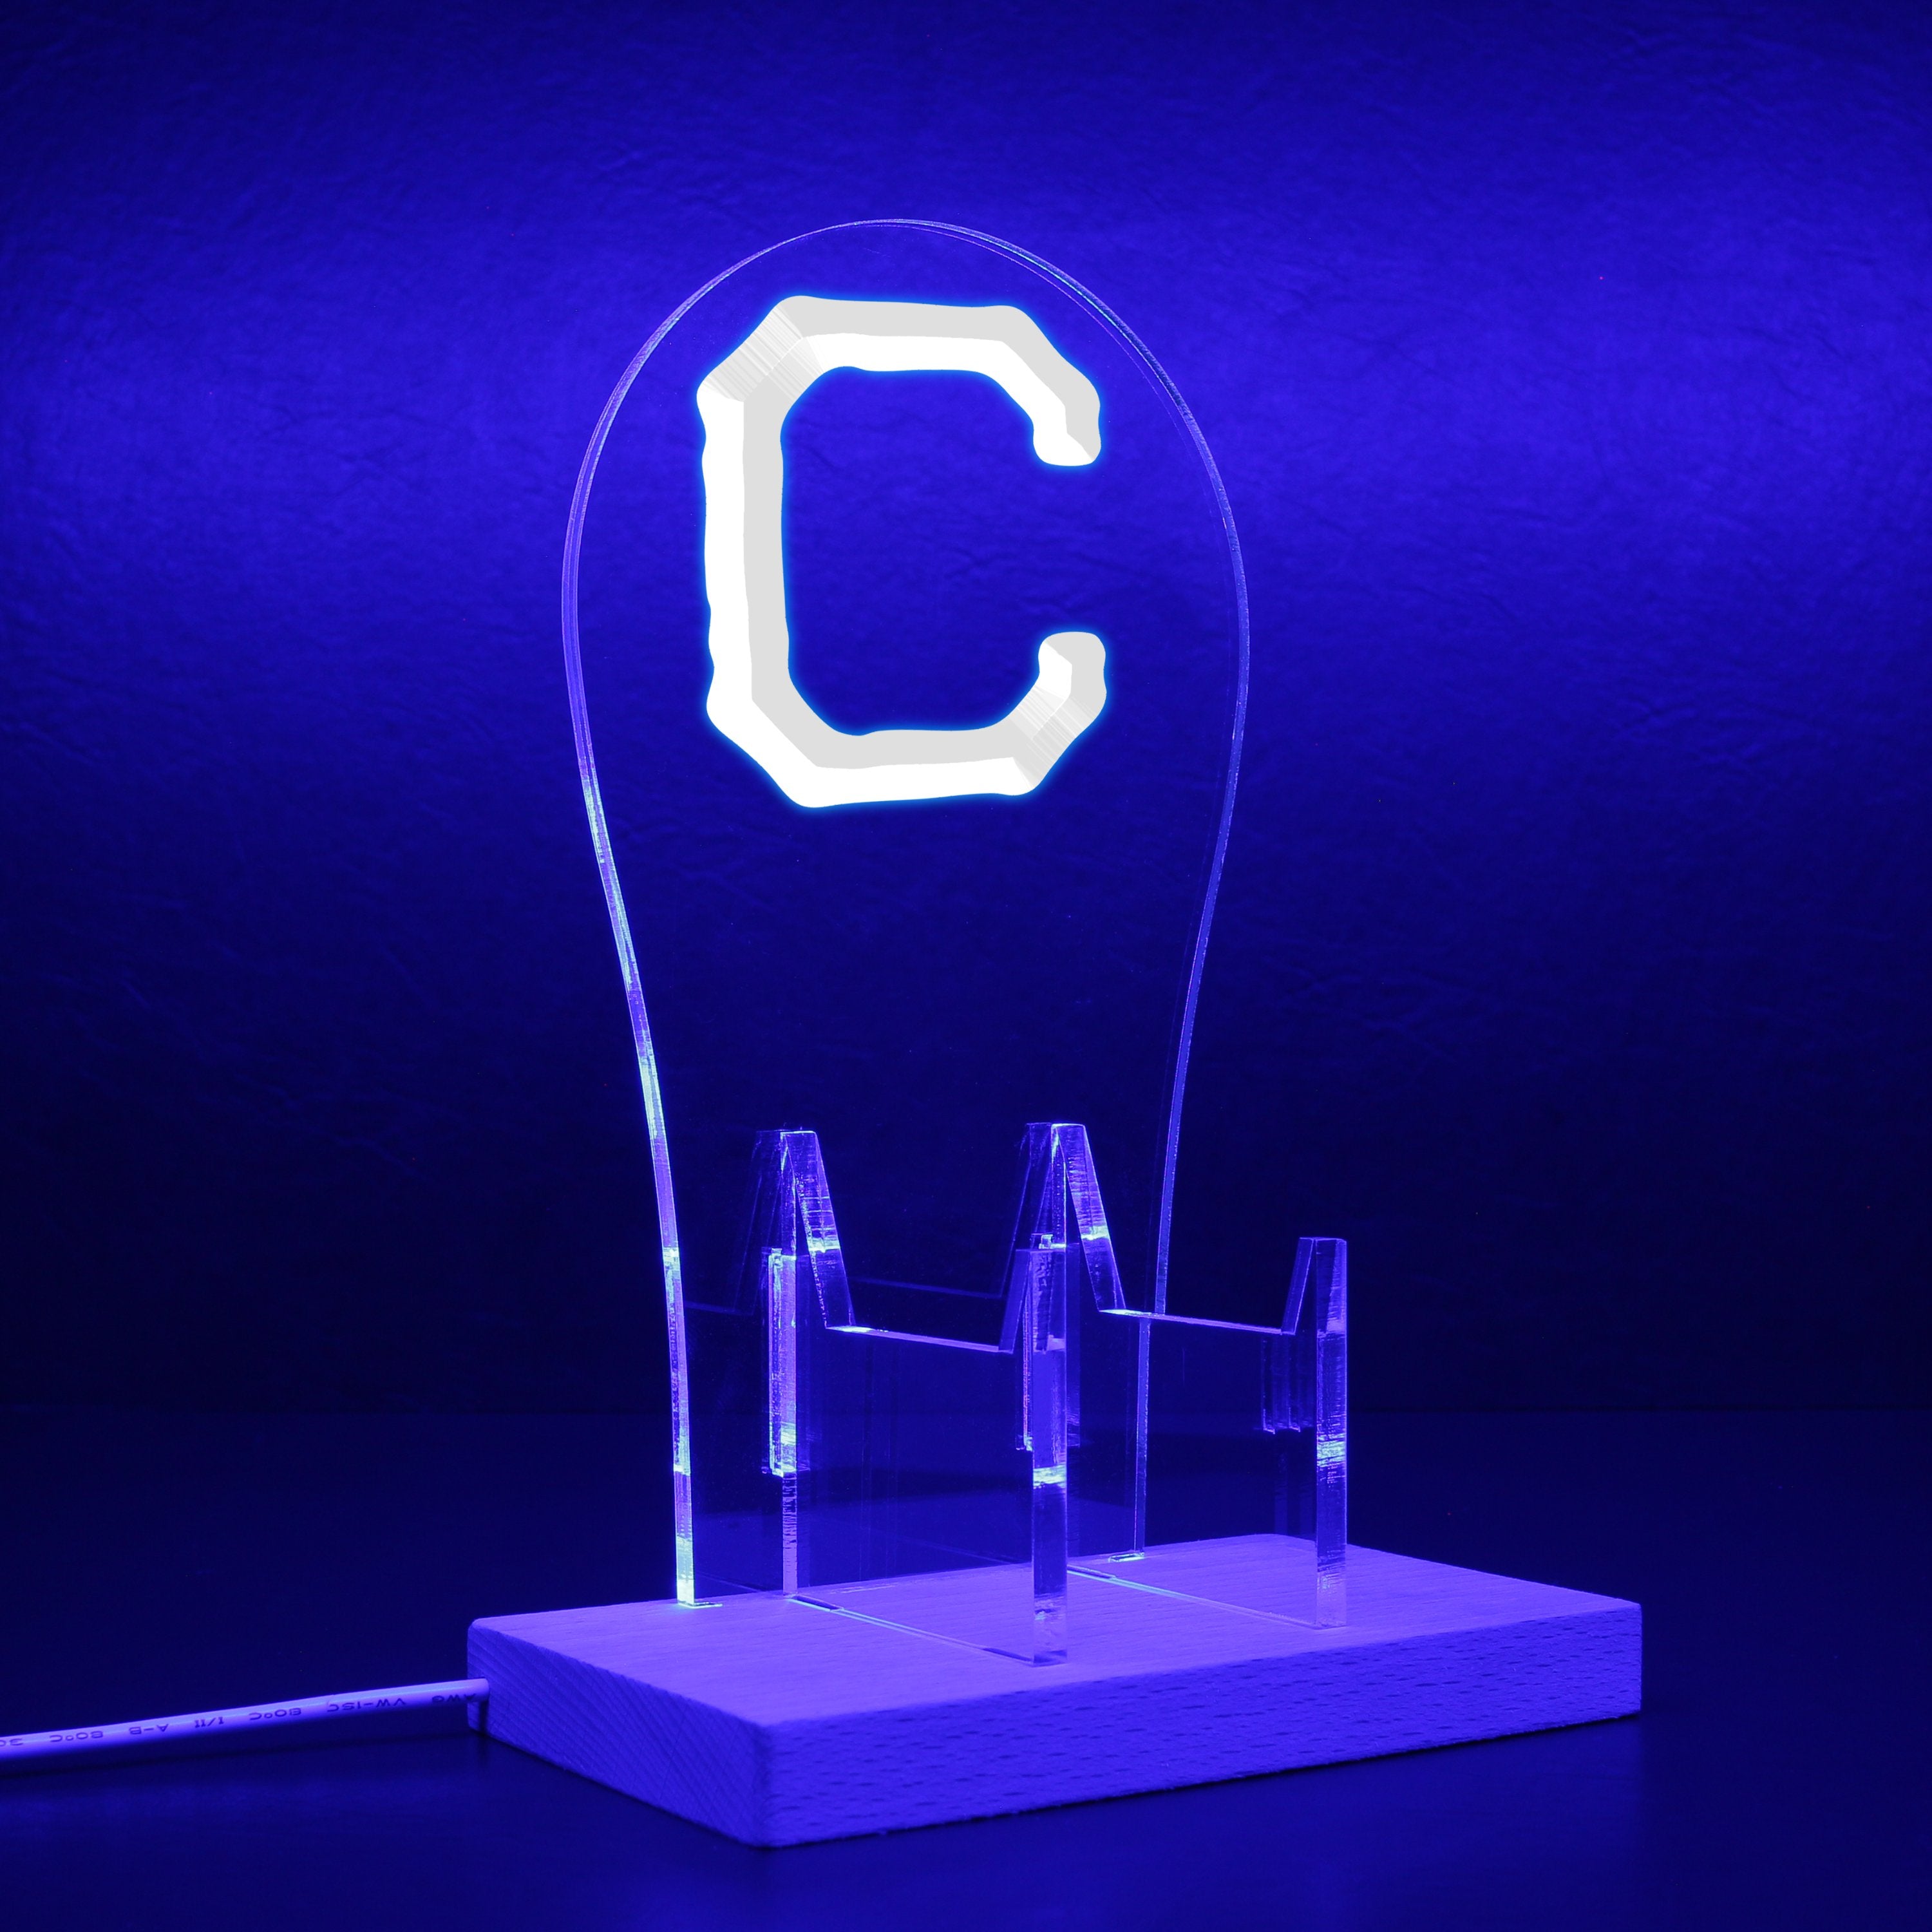 Cleveland Indians Cap used in 1918 RGB LED Gaming Headset Controller Stand